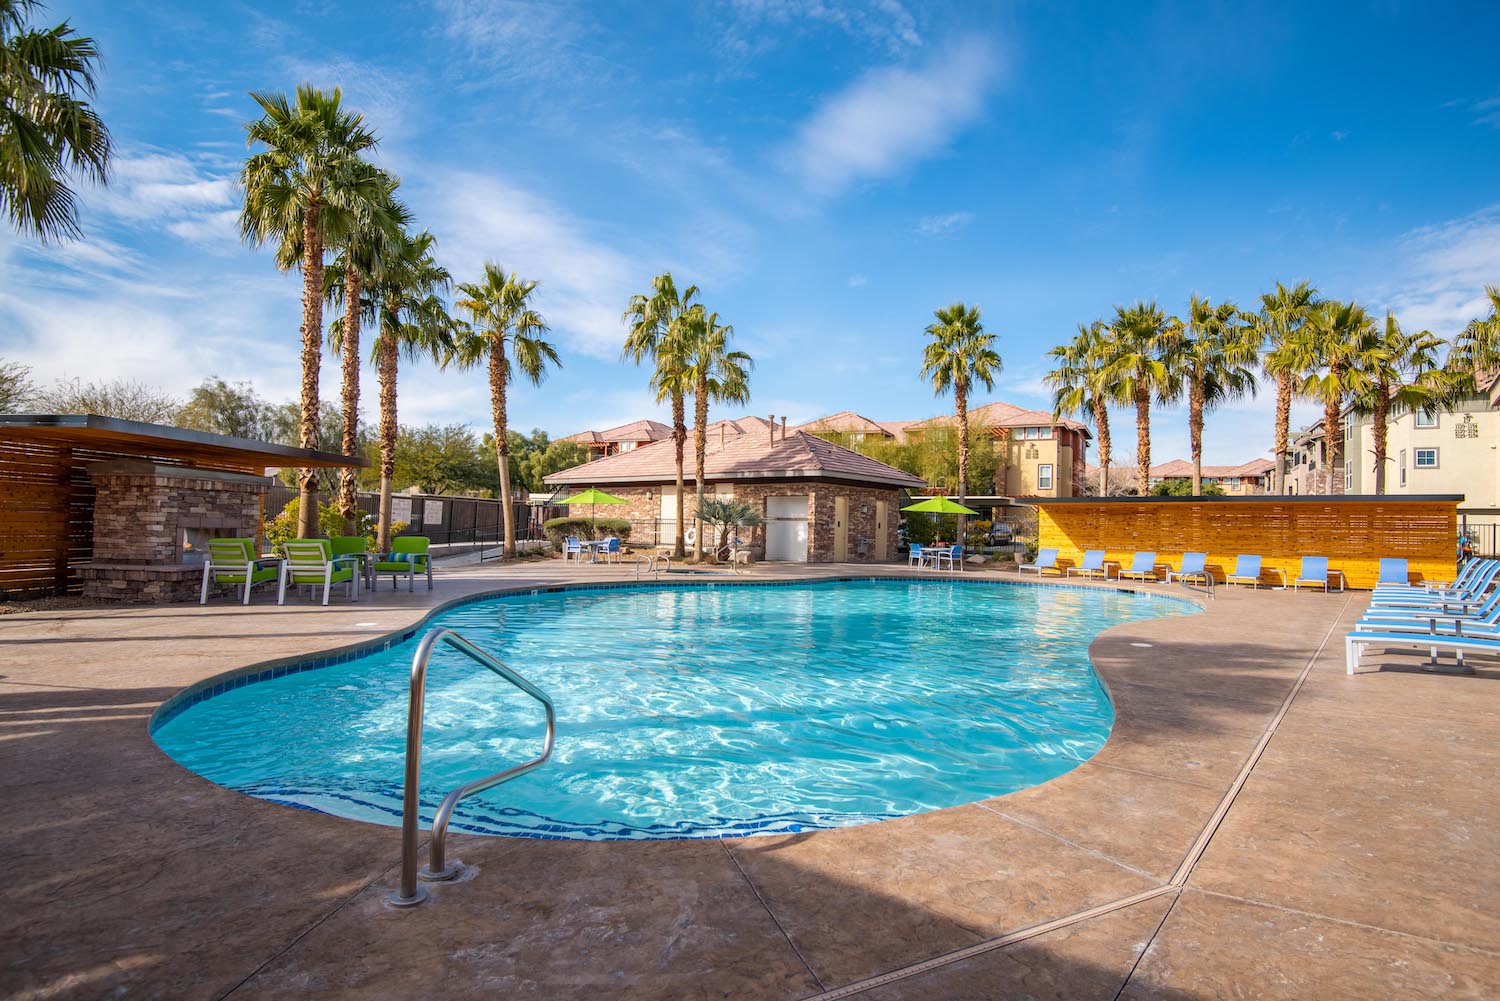 Cantor Fitzgerald Sells Las Vegas Multifamily DST Property